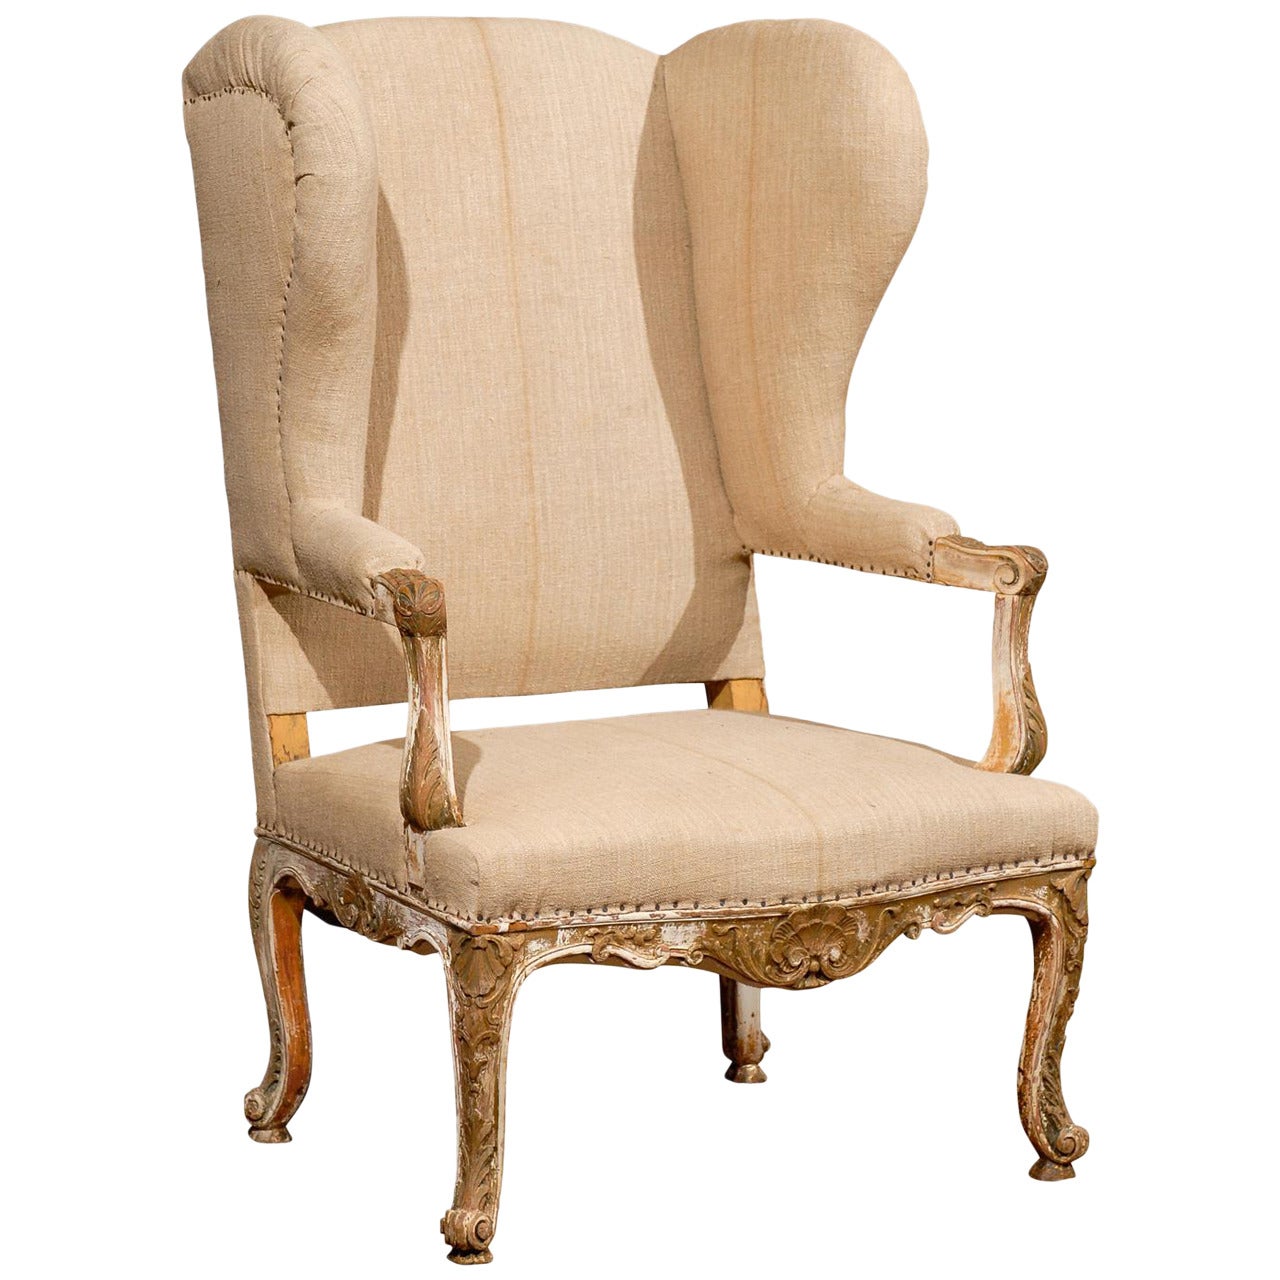 19th Century French Giltwood Upholstered Wing Chair